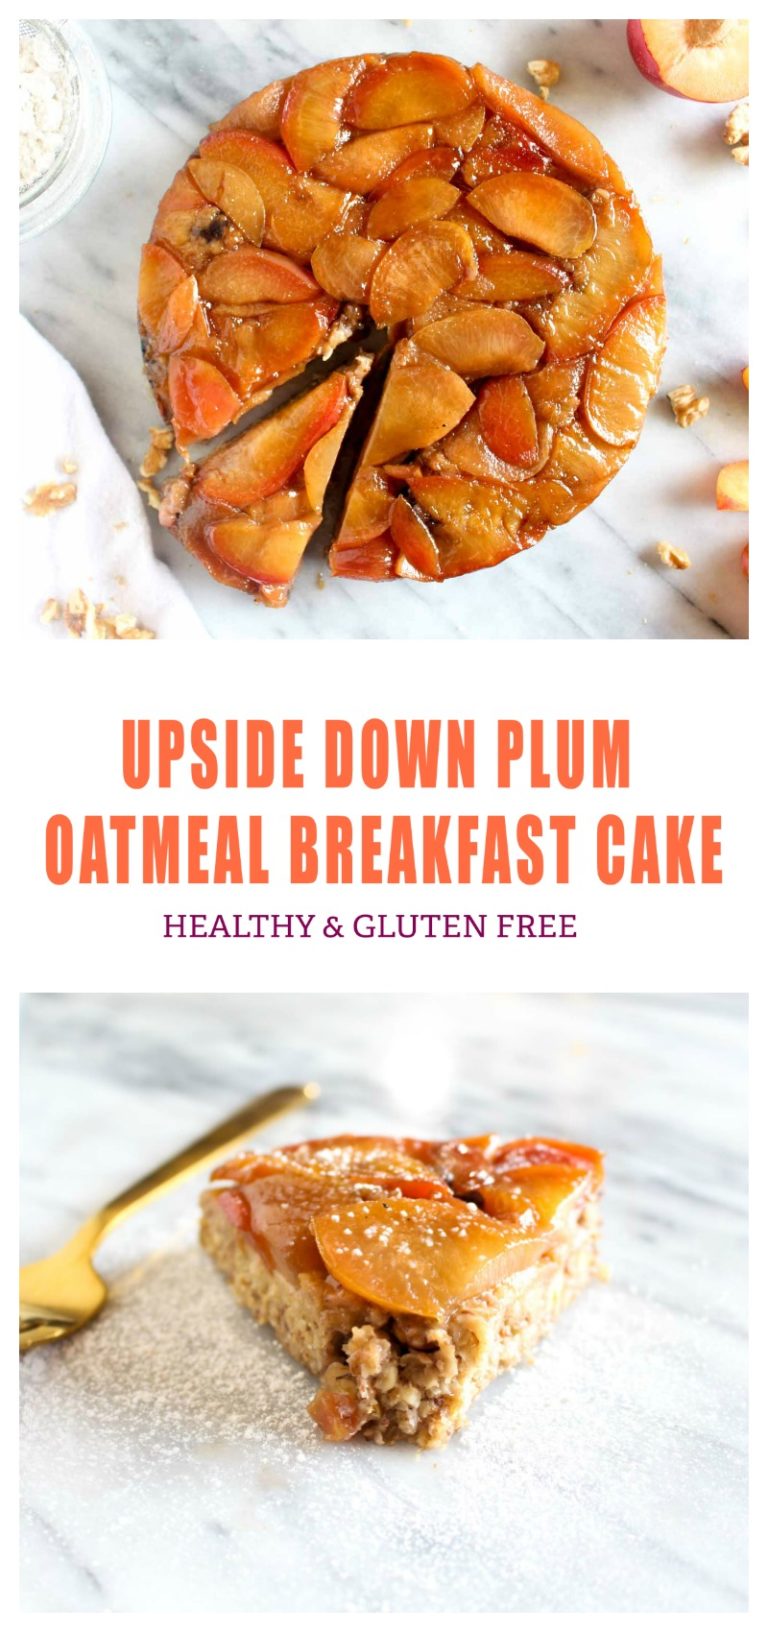 Upside down plumb oatmeal cake eat in the morning with coffee